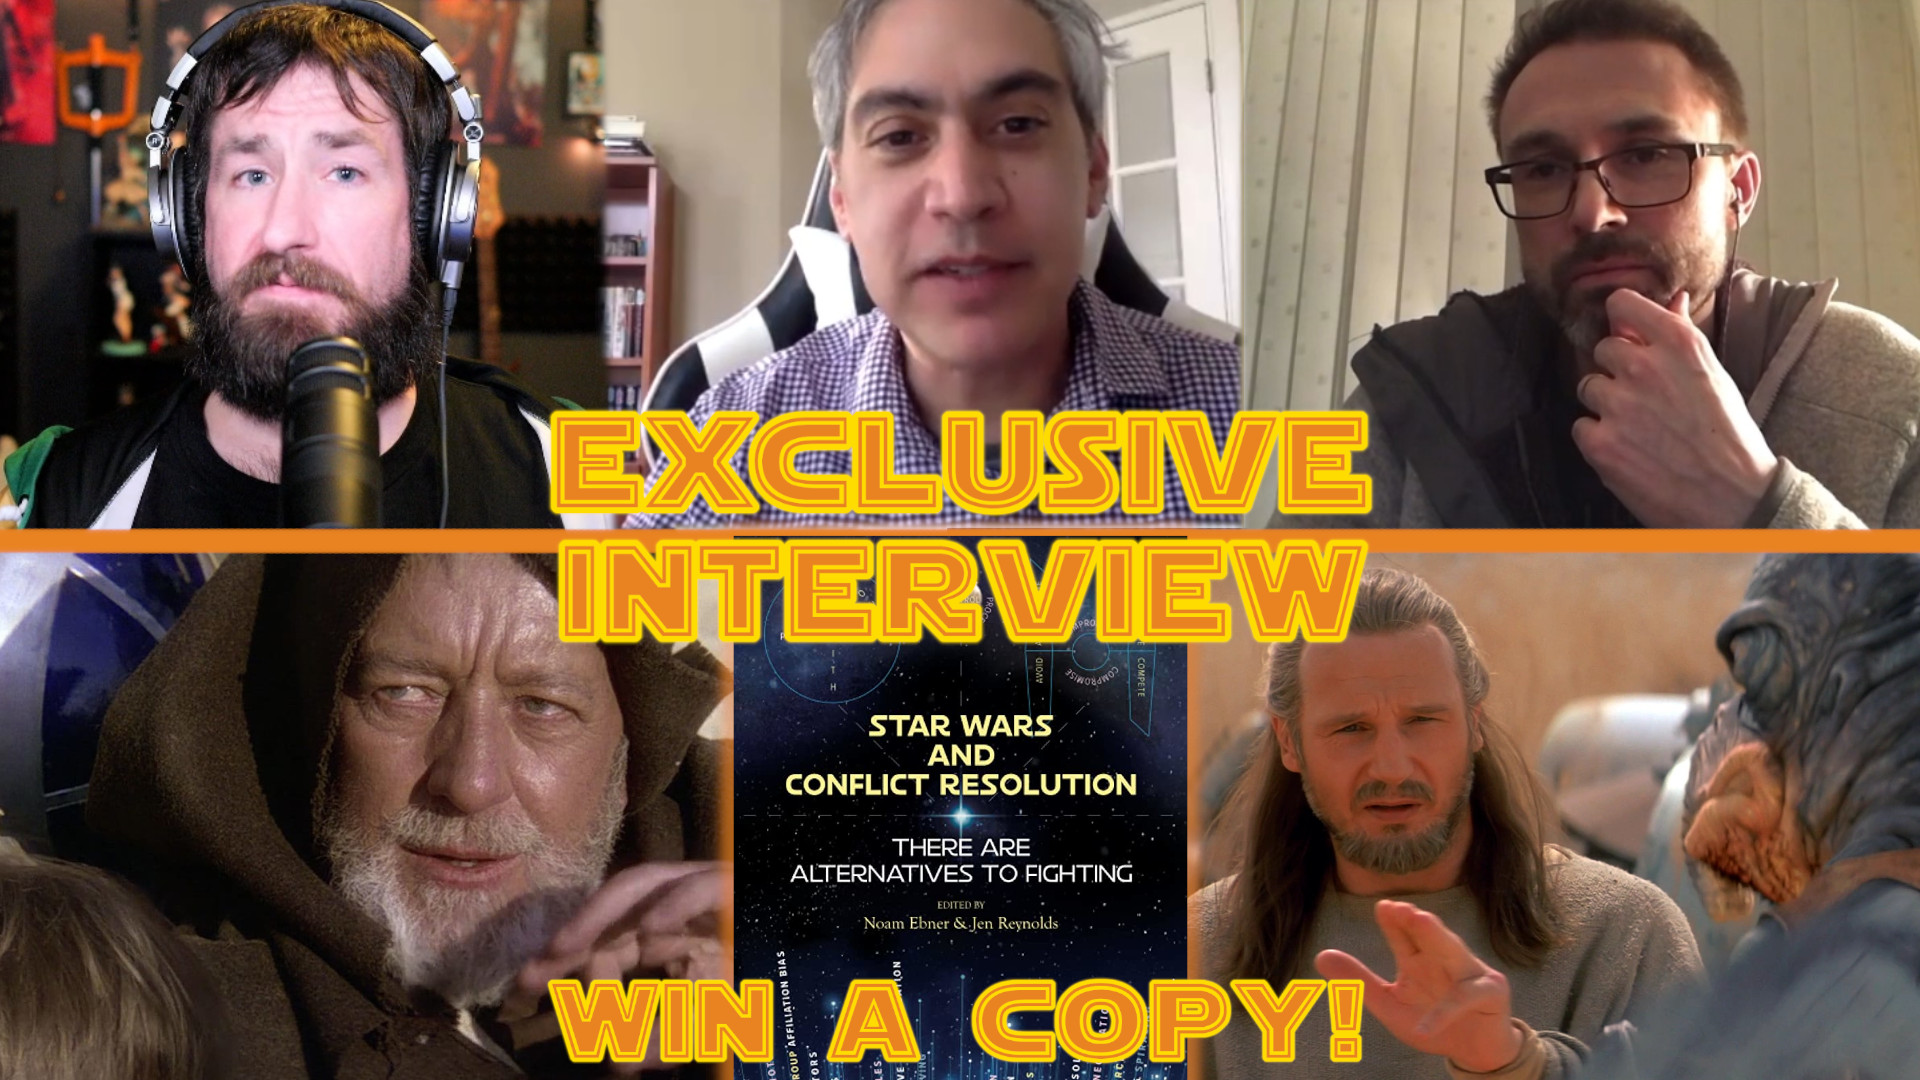 Star Wars And Conflict Resolution: Interview With Scott Maravilla | TC